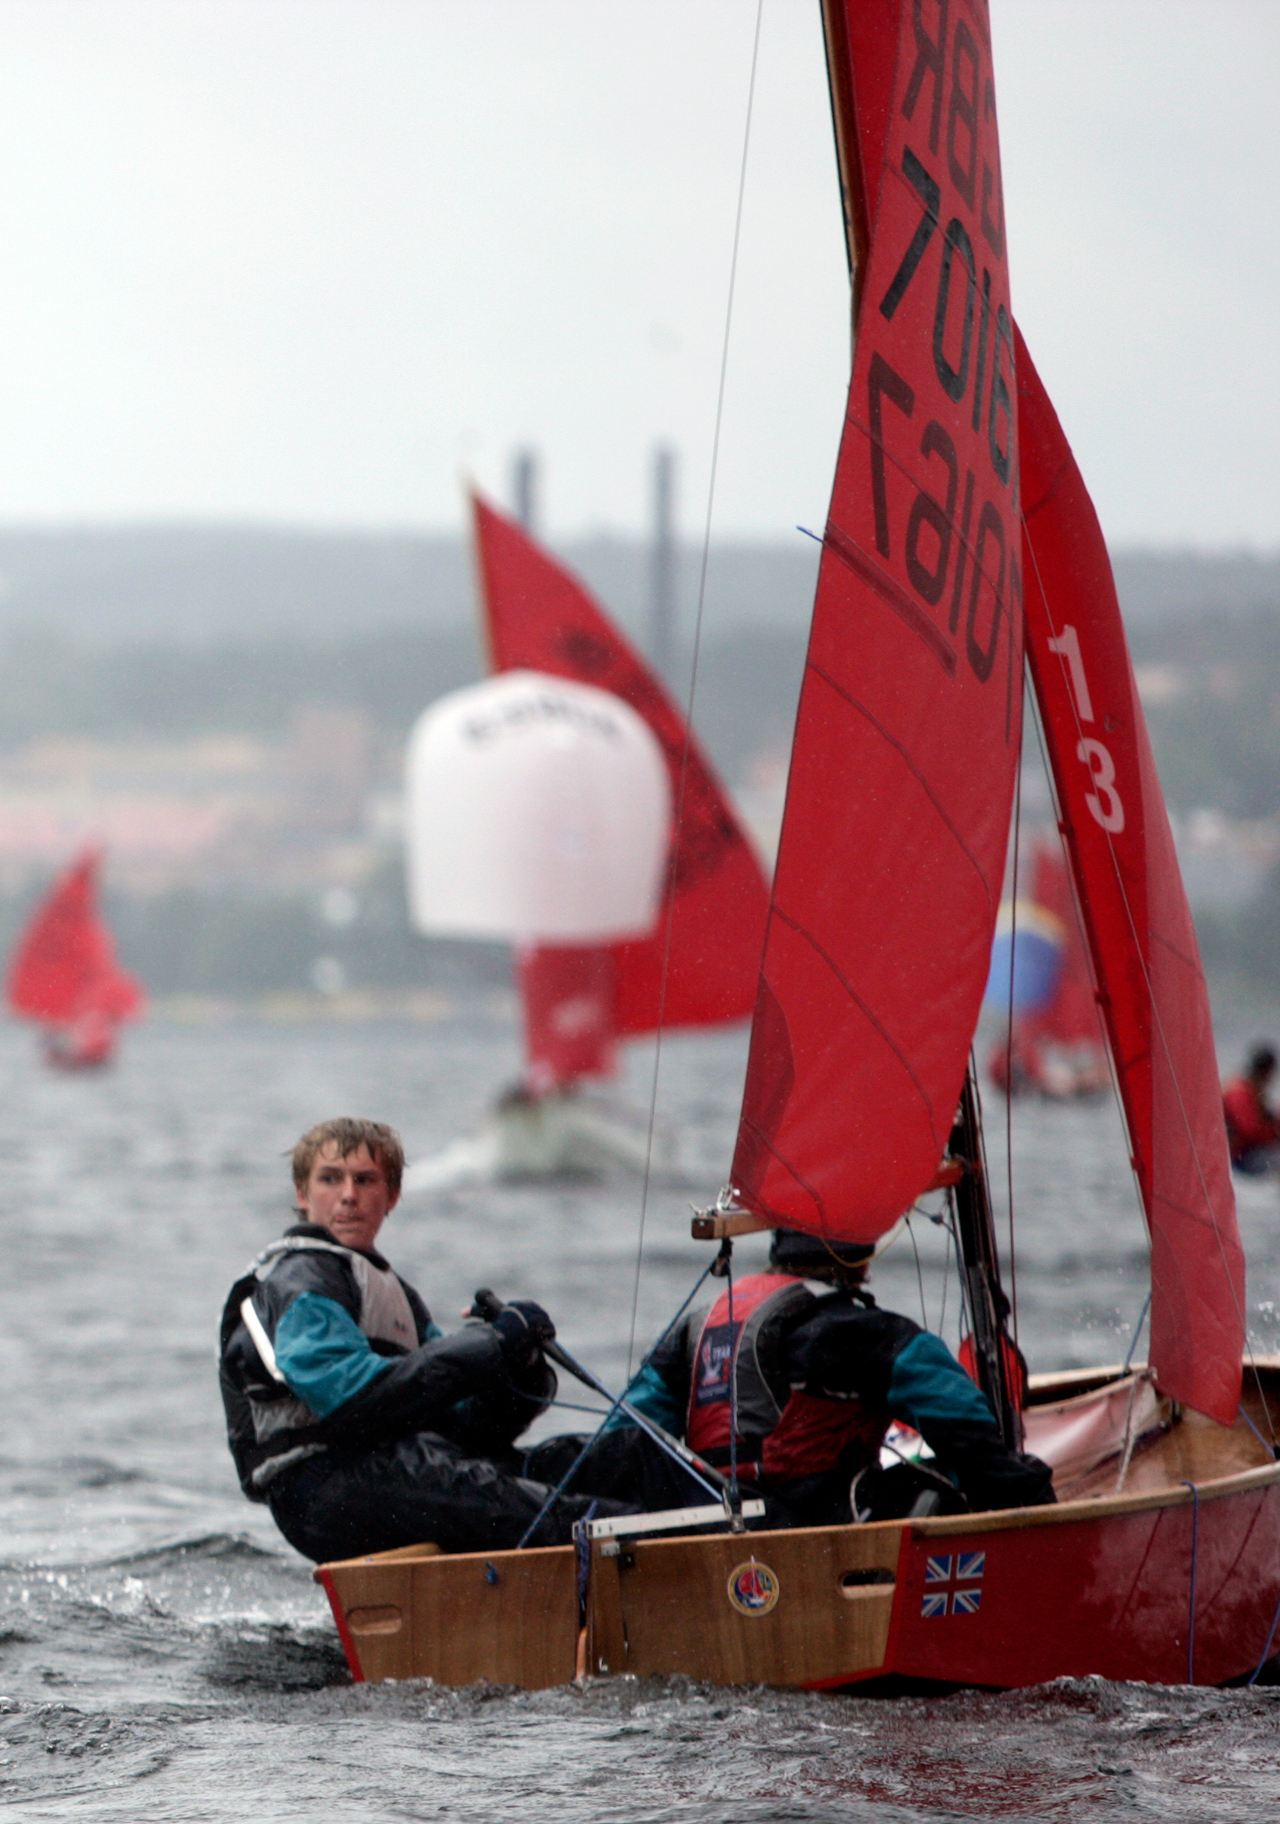 A red Mirror dinghy racing with helm looking to see if he can tack